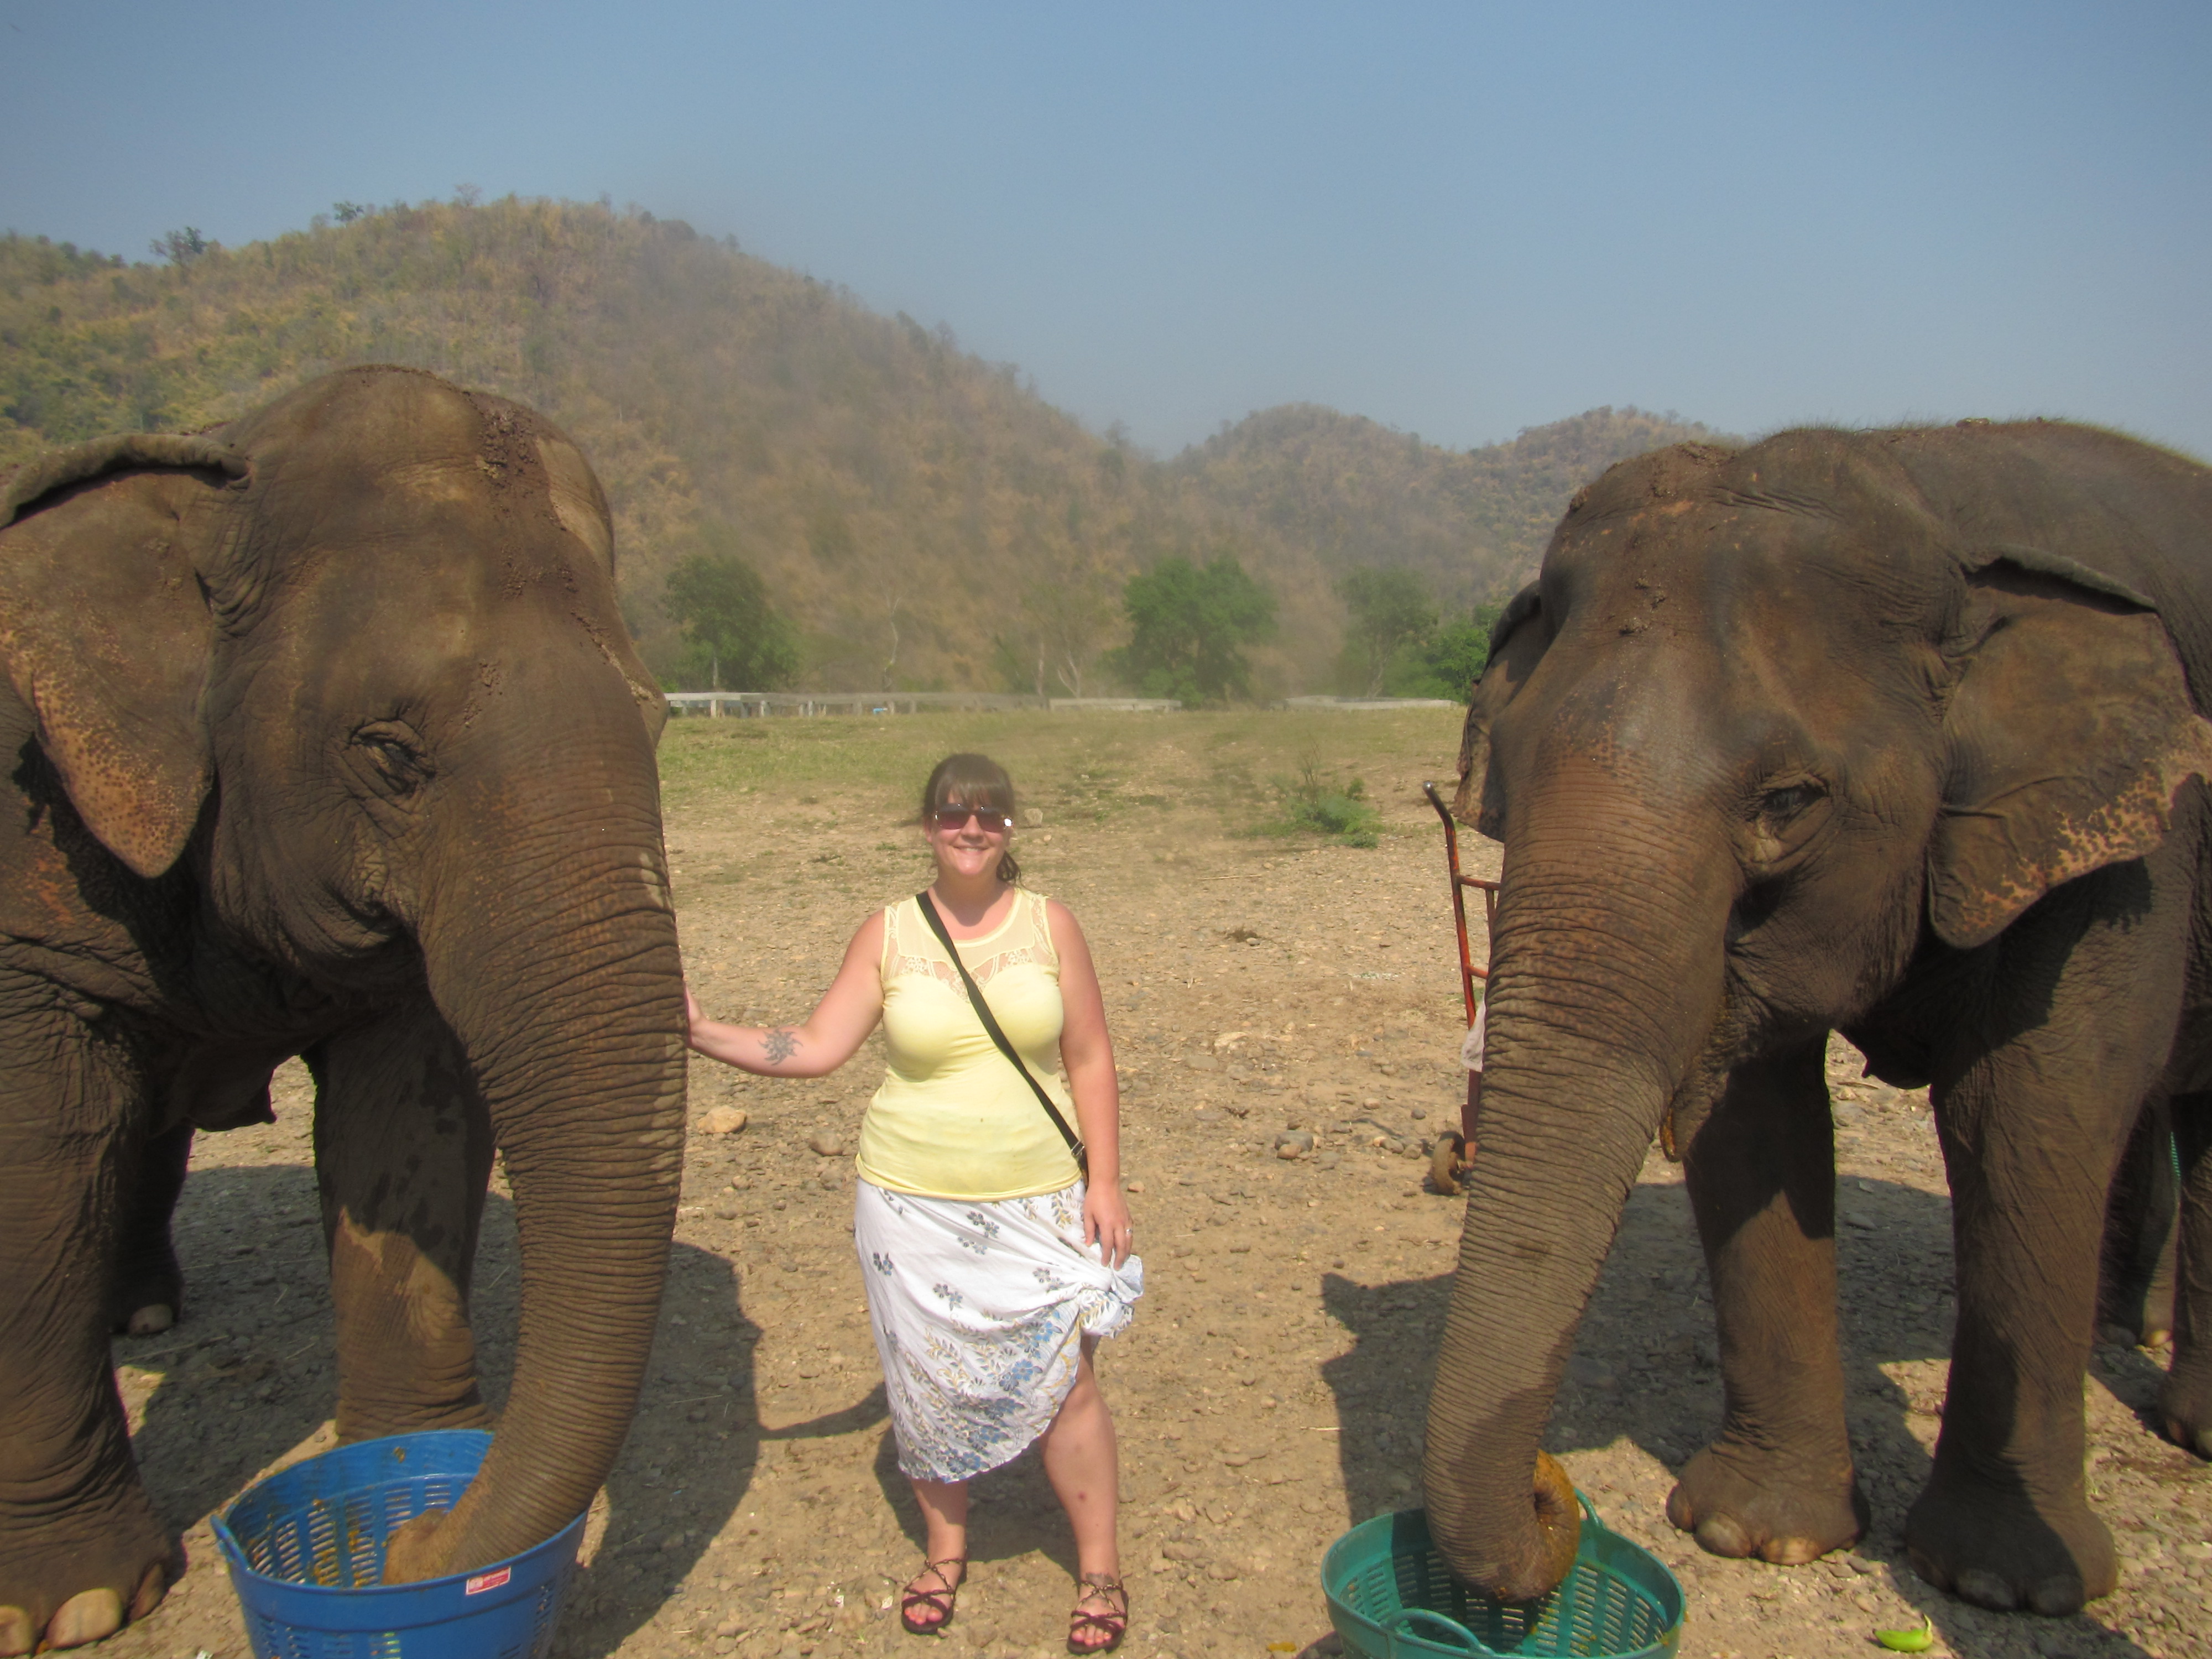 Me and one of my favorite elephants (the one to my right).  The elephant to my left helps take care of Jokia...she's blind.